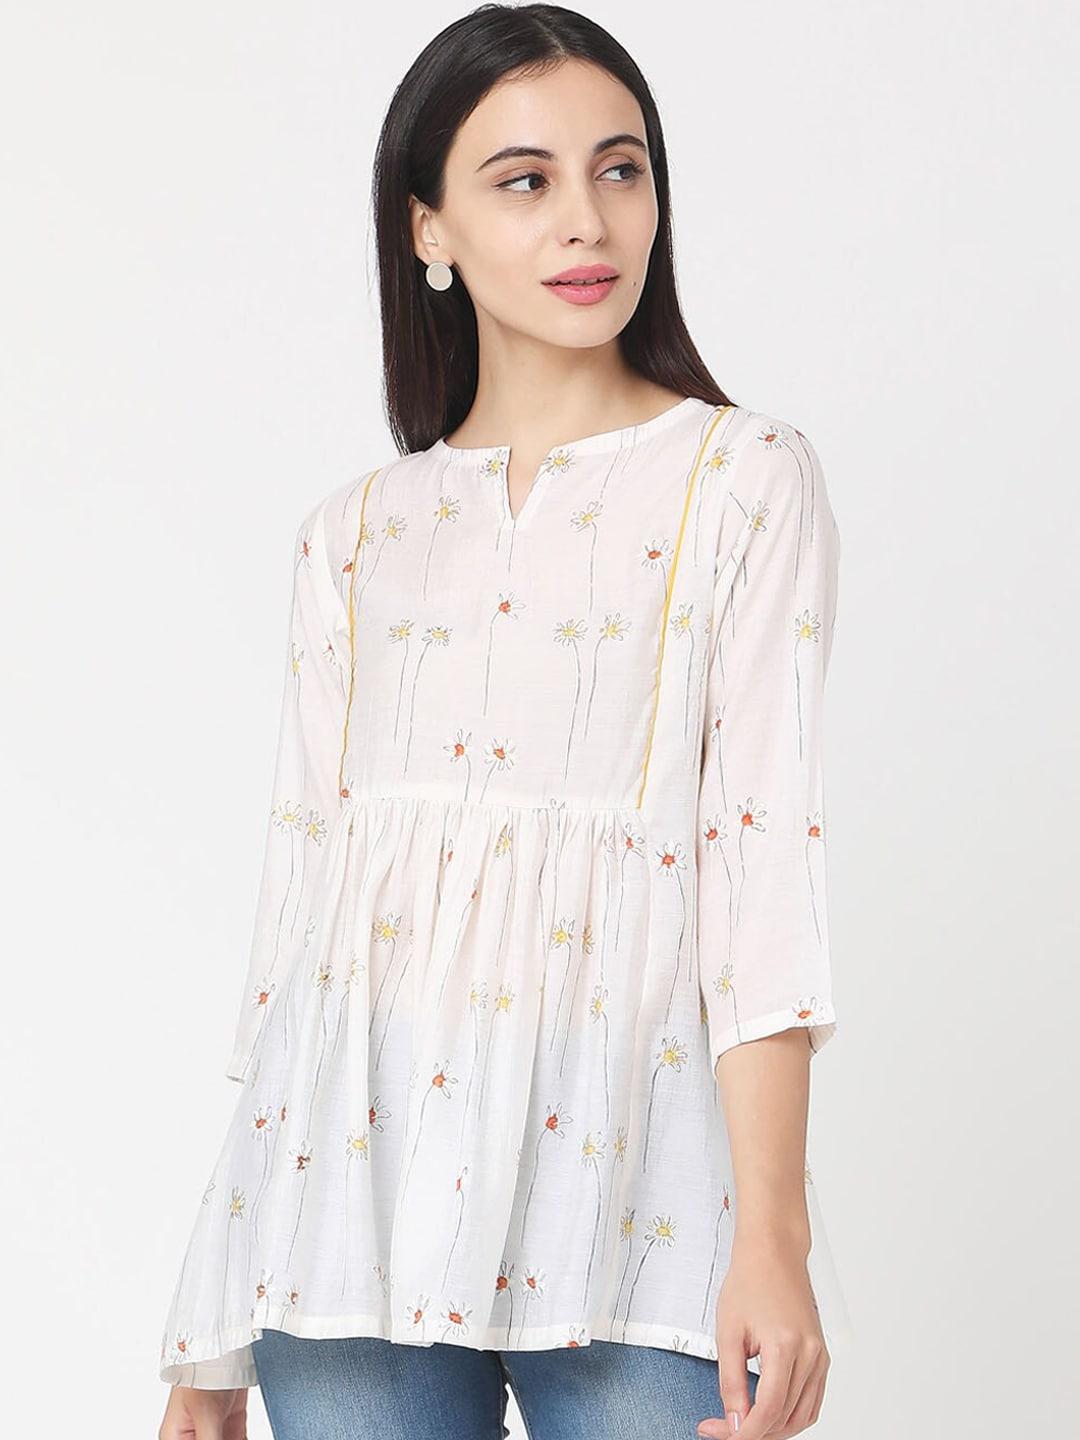 Saanjh Women White & Yellow Floral Printed Tunic